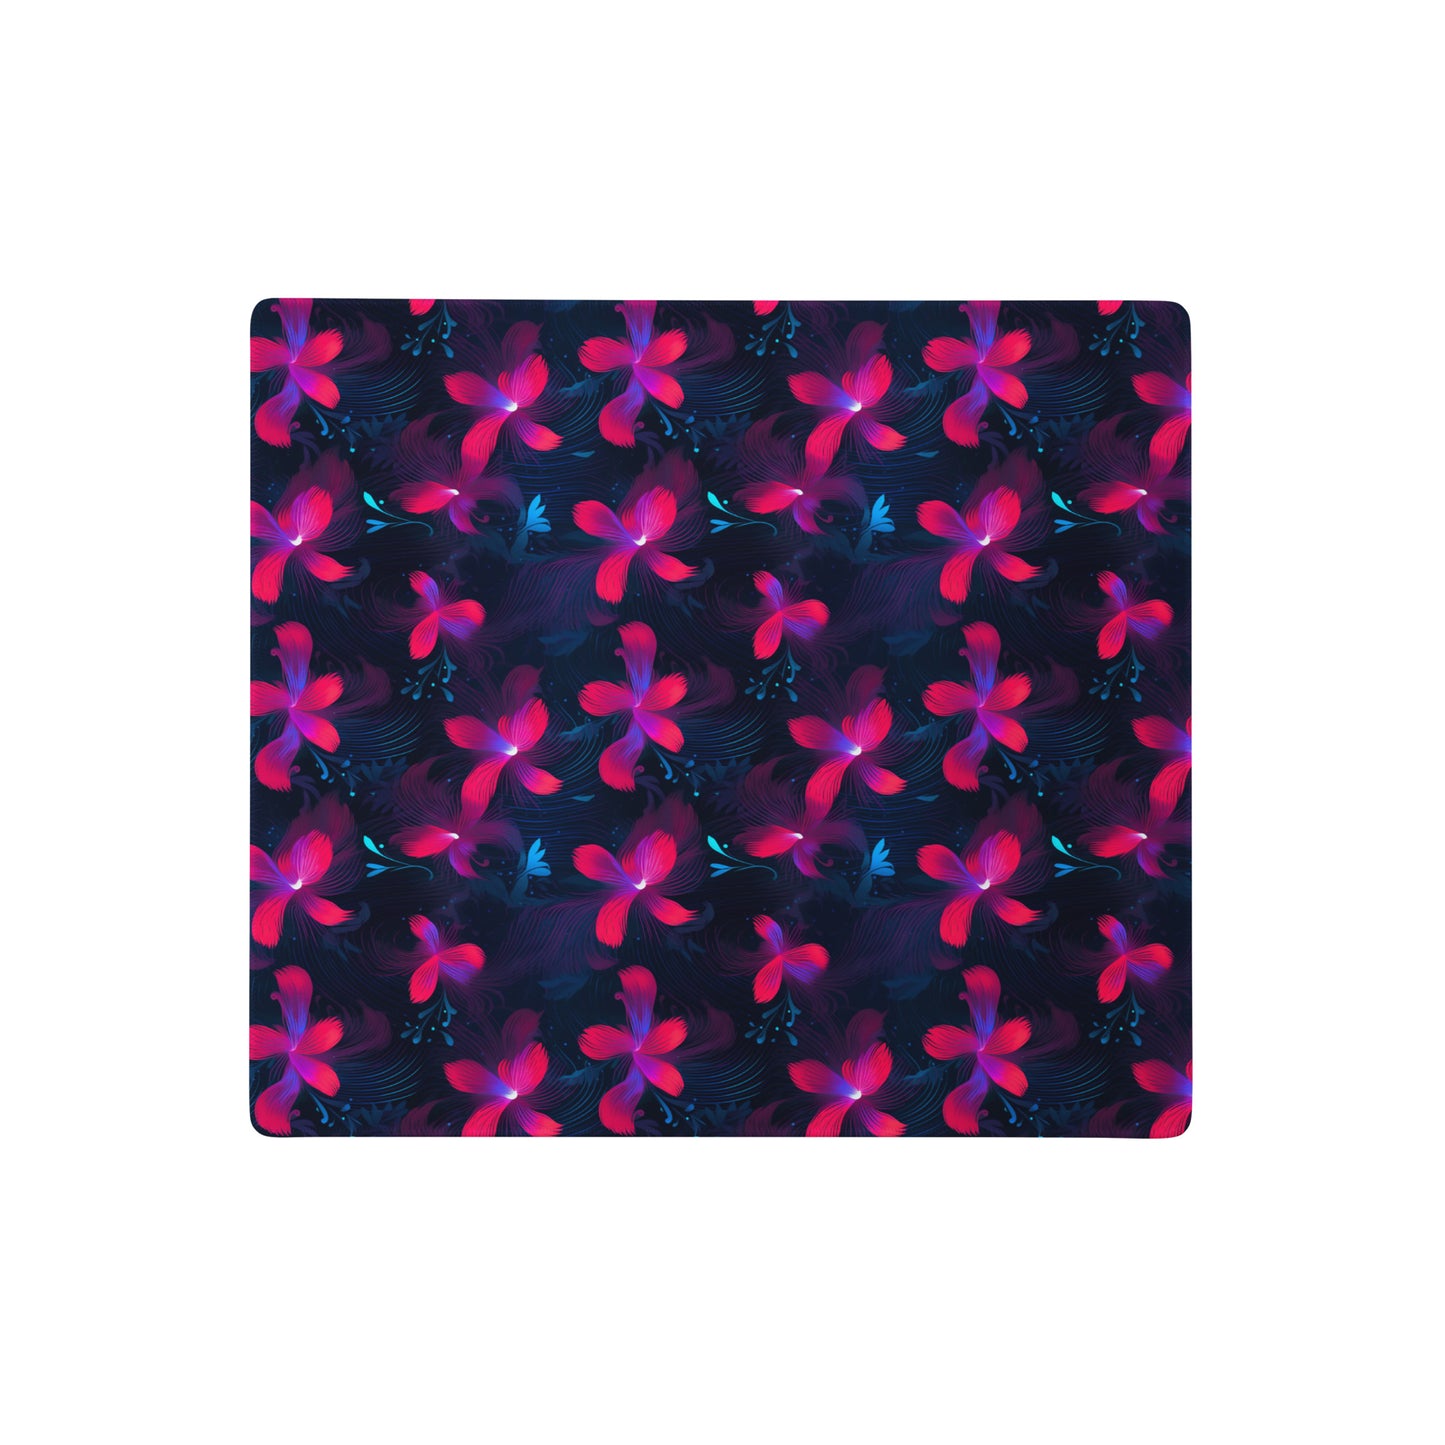 A 18" x 16" desk pad with neon pink and blue floral pattern.